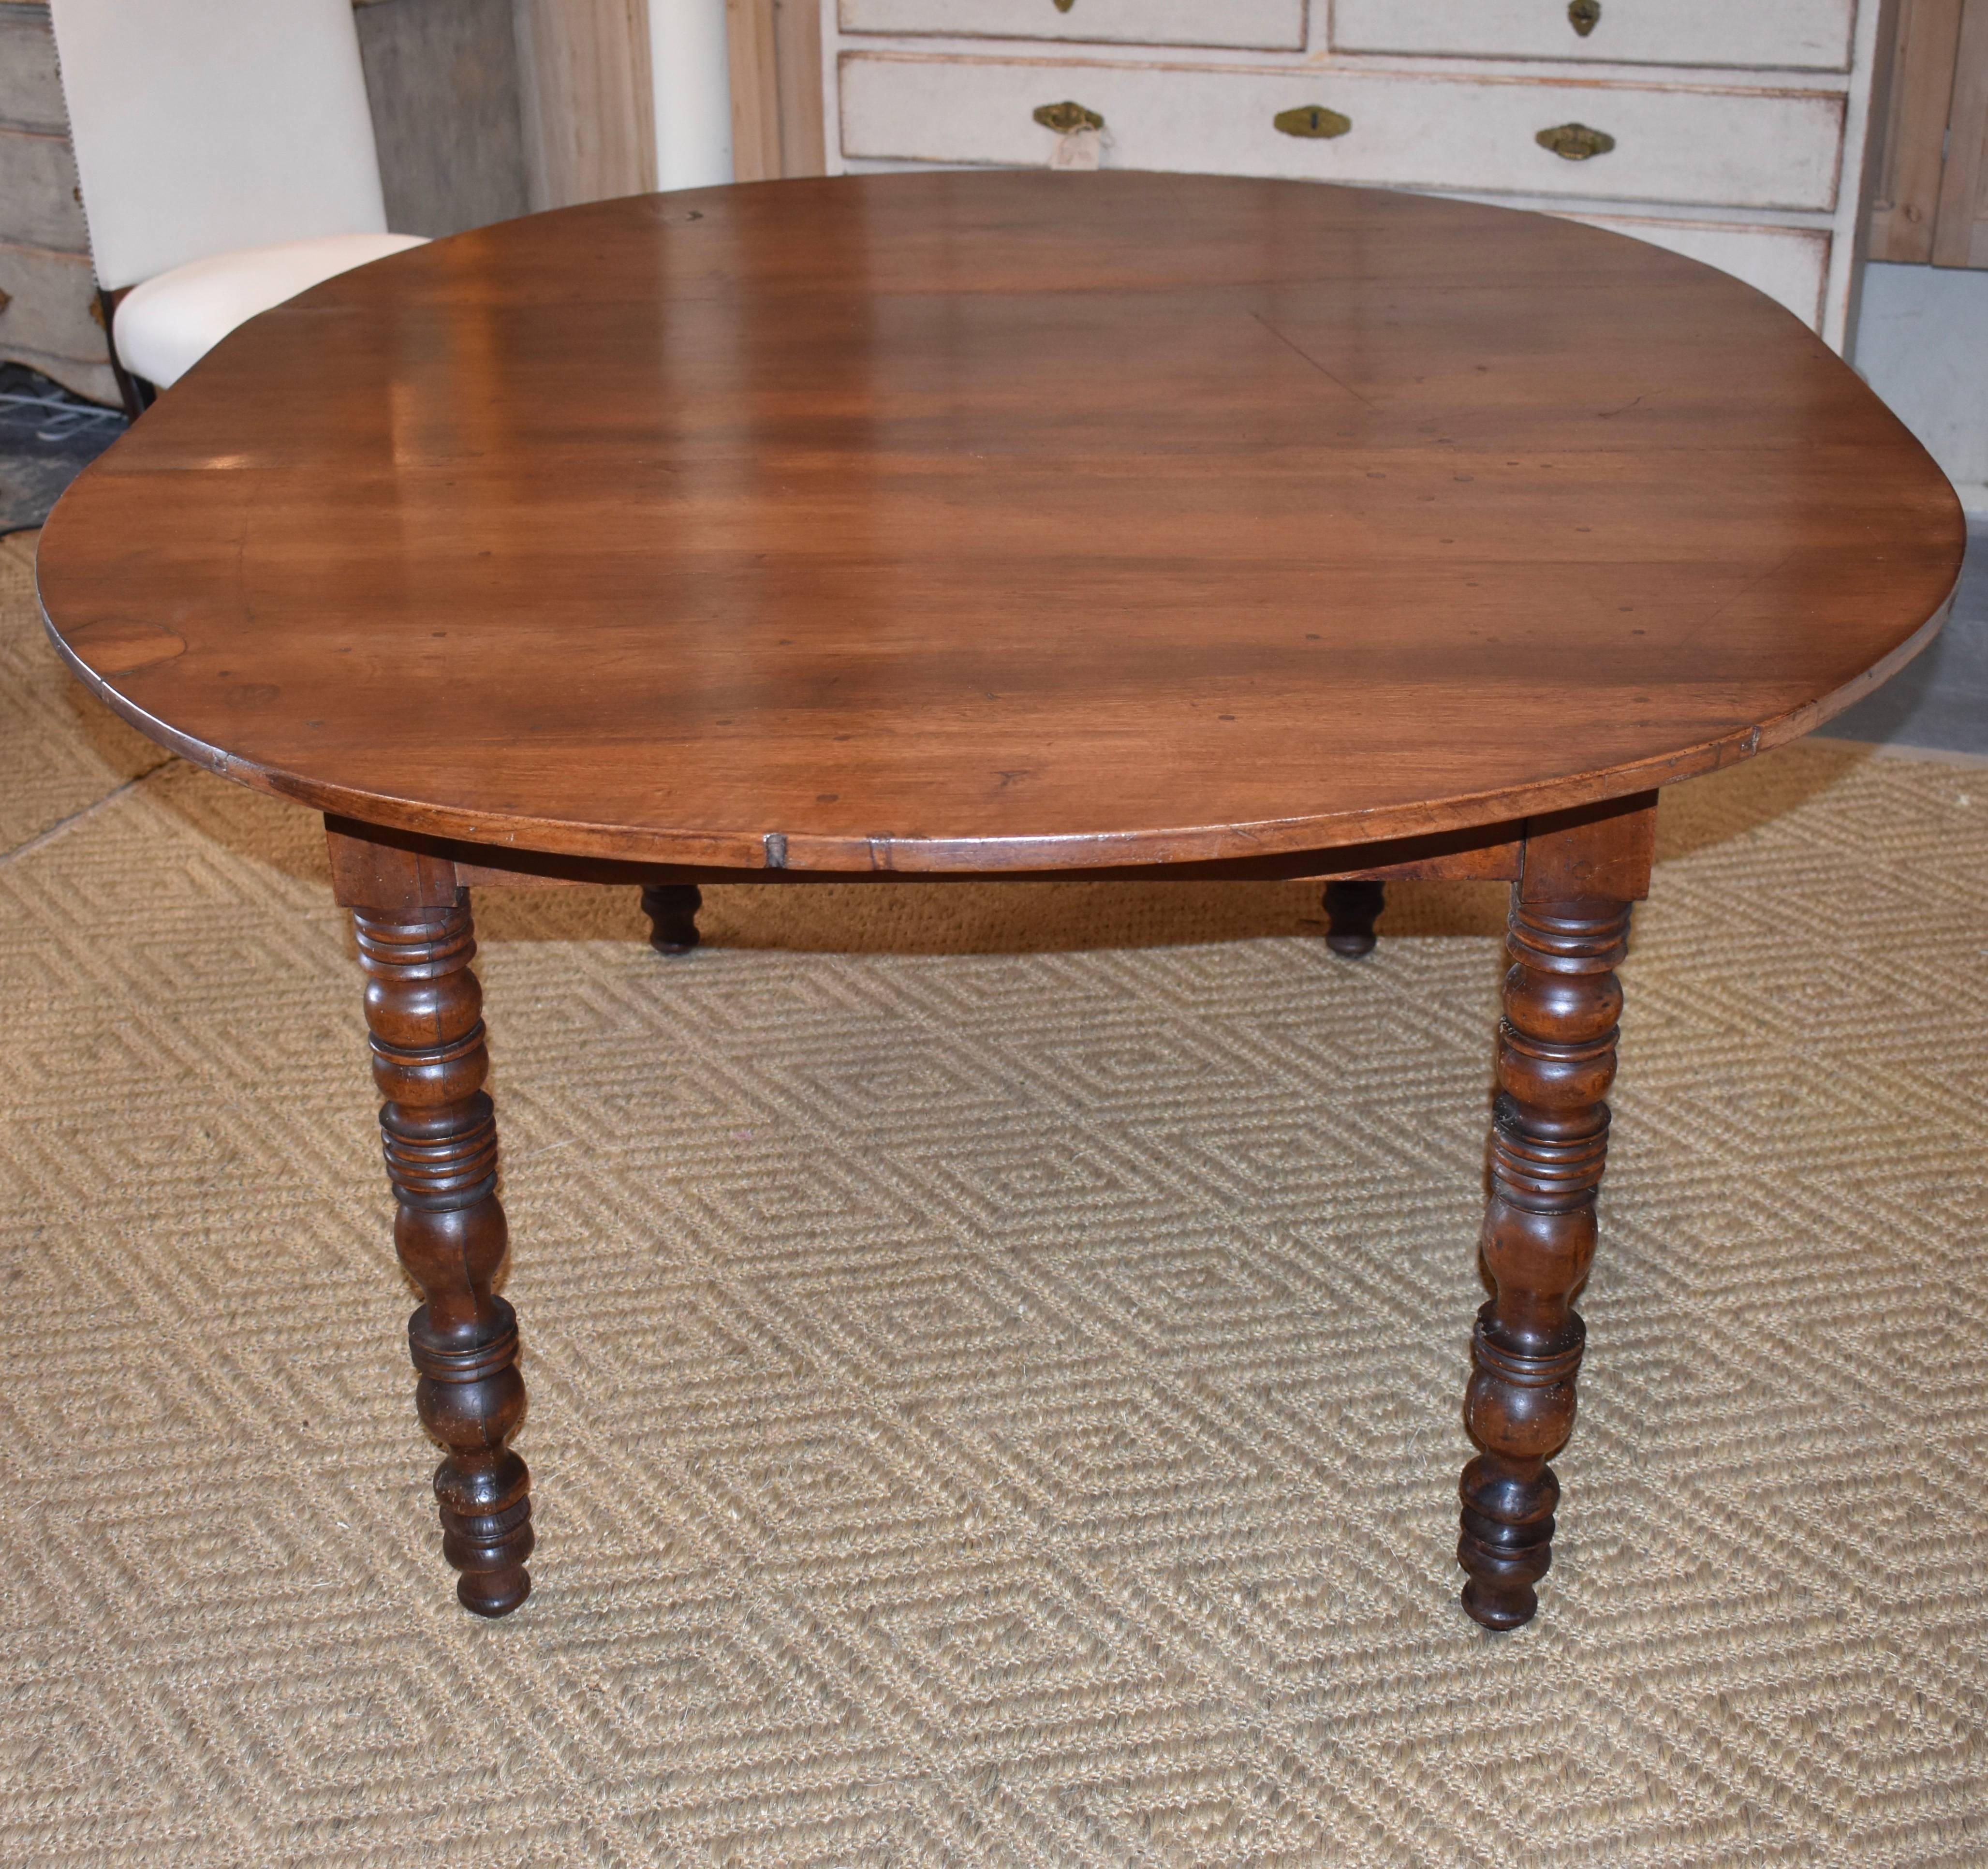 Beautiful early 19th century French walnut oval dining table. Great aged walnut patina with lovely hand turned legs. Terrific size for kitchen or small area dining. Apron height 24.5